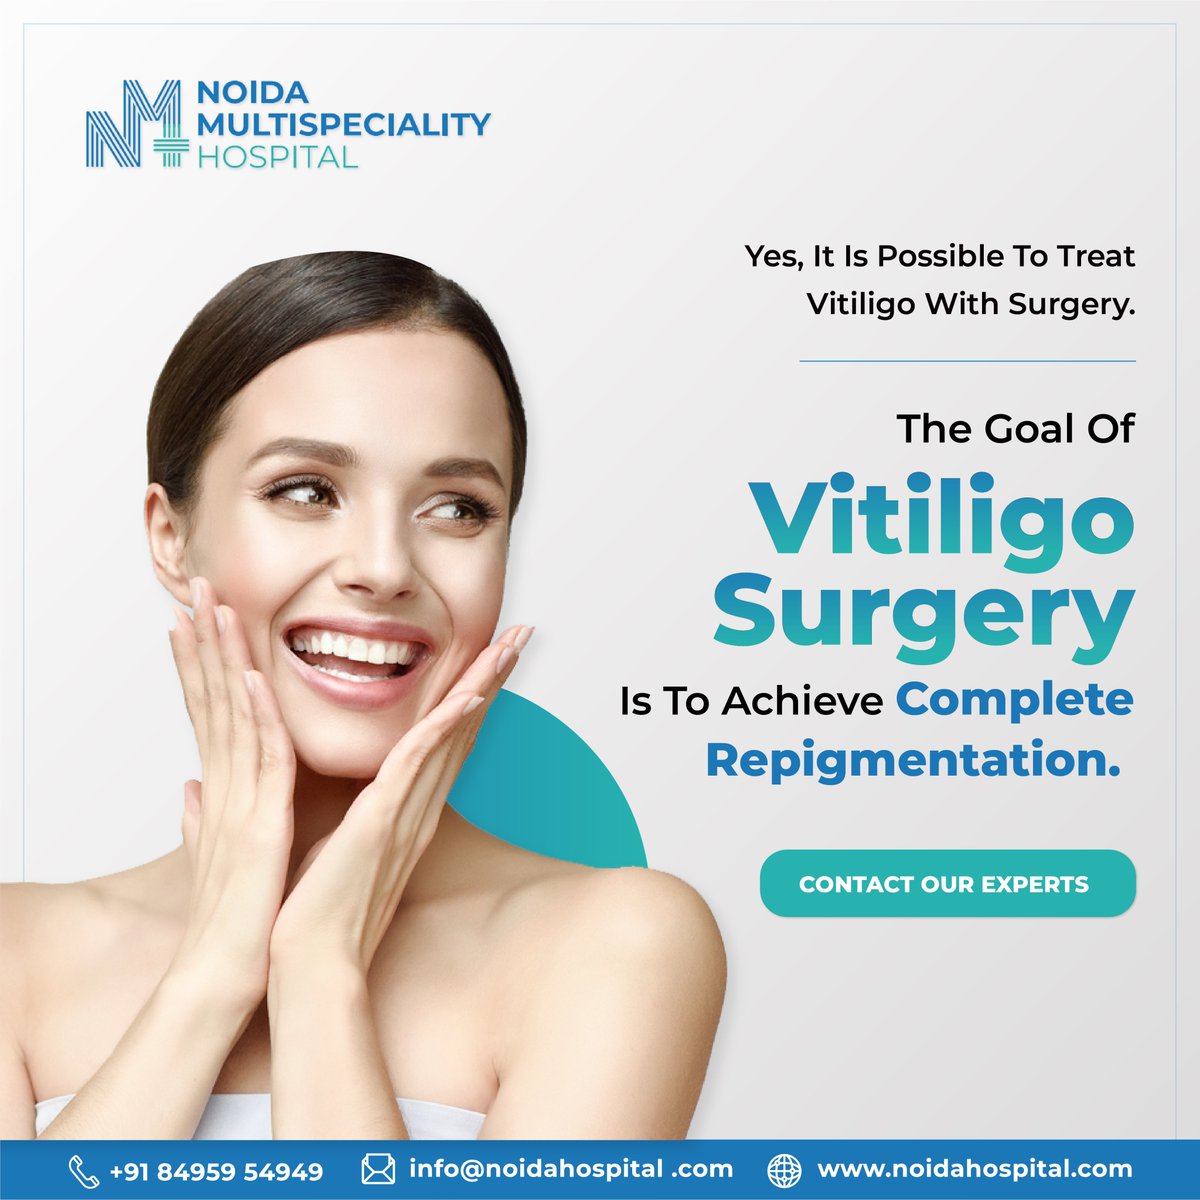 Your vitiligo is #curable.

Don't worry! With a team of #experts, we offer #cuttingedge and #wellequipped Vitiligo procedures. 

For excellent #vitiligo #surgery #advice get in touch with us: at +91-8495954949

#noidamultispecialityhospital #hospitalinNoida #dermatology #skincare